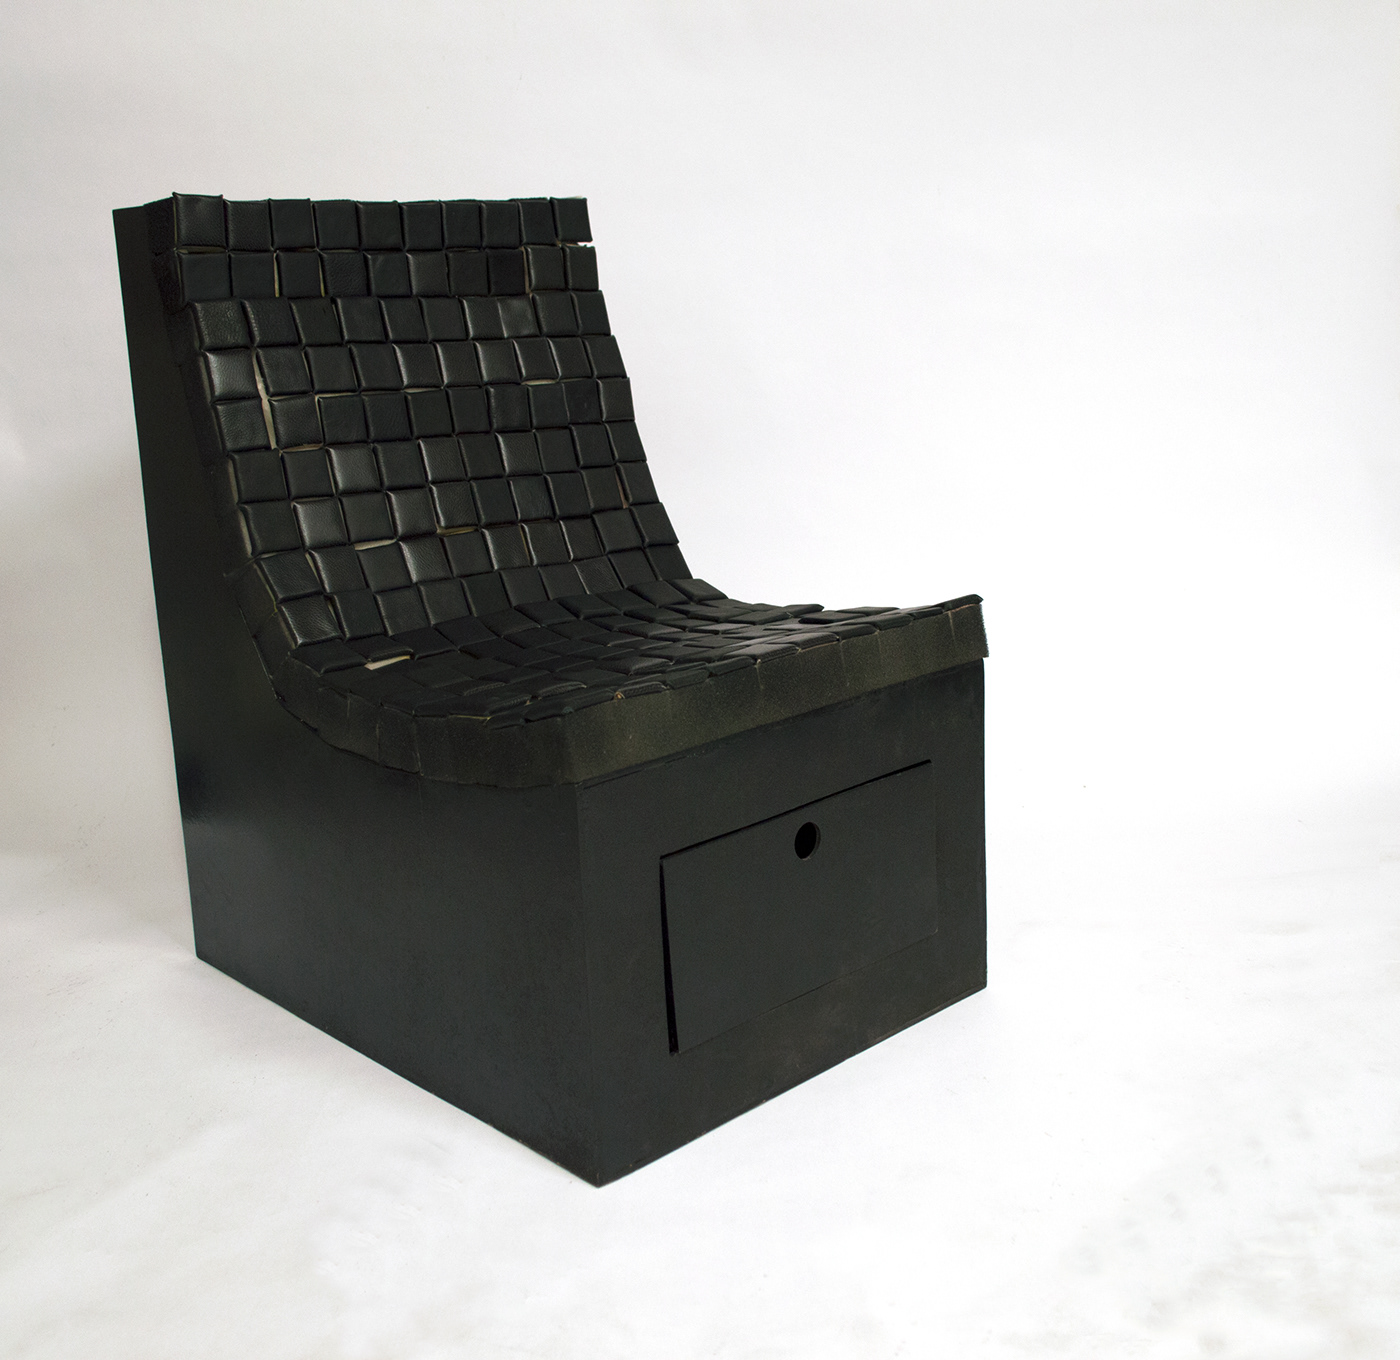 furniture design  chair upcycled wintersession leather black RECYCLED Upcycled Furniture upholstery foam freshman year